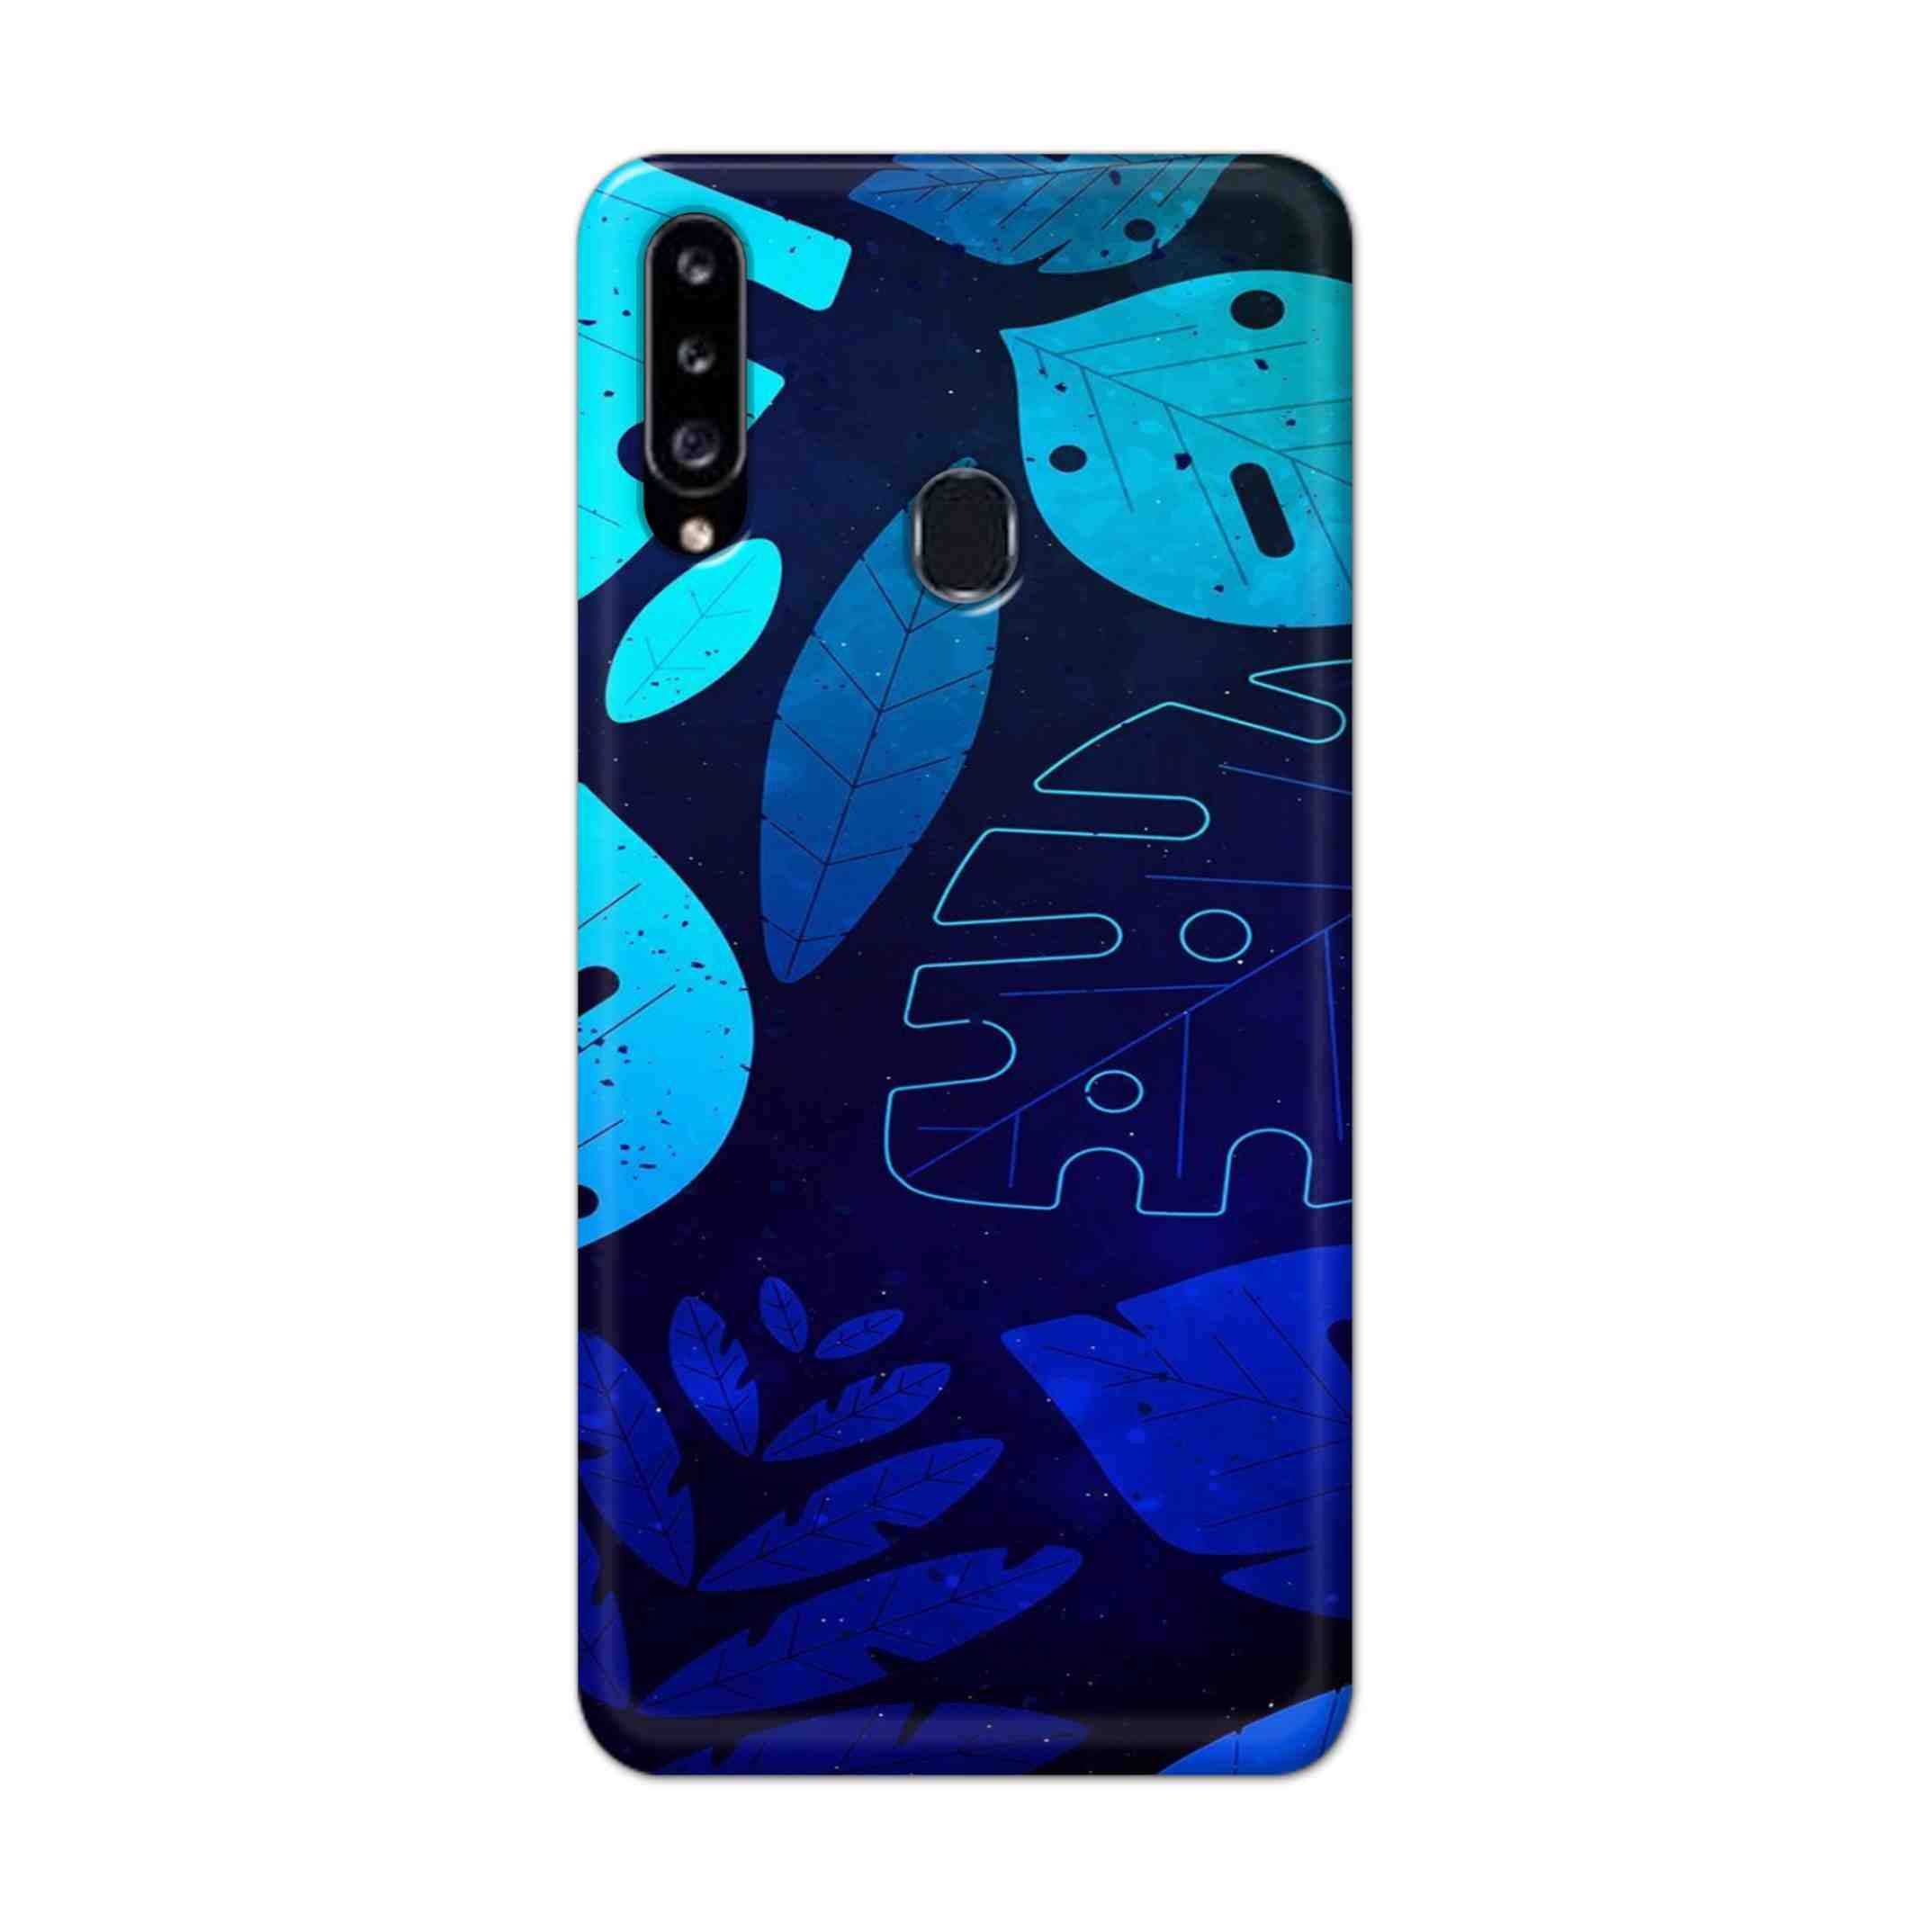 Buy Neon Leaf Hard Back Mobile Phone Case Cover For Samsung Galaxy A21 Online